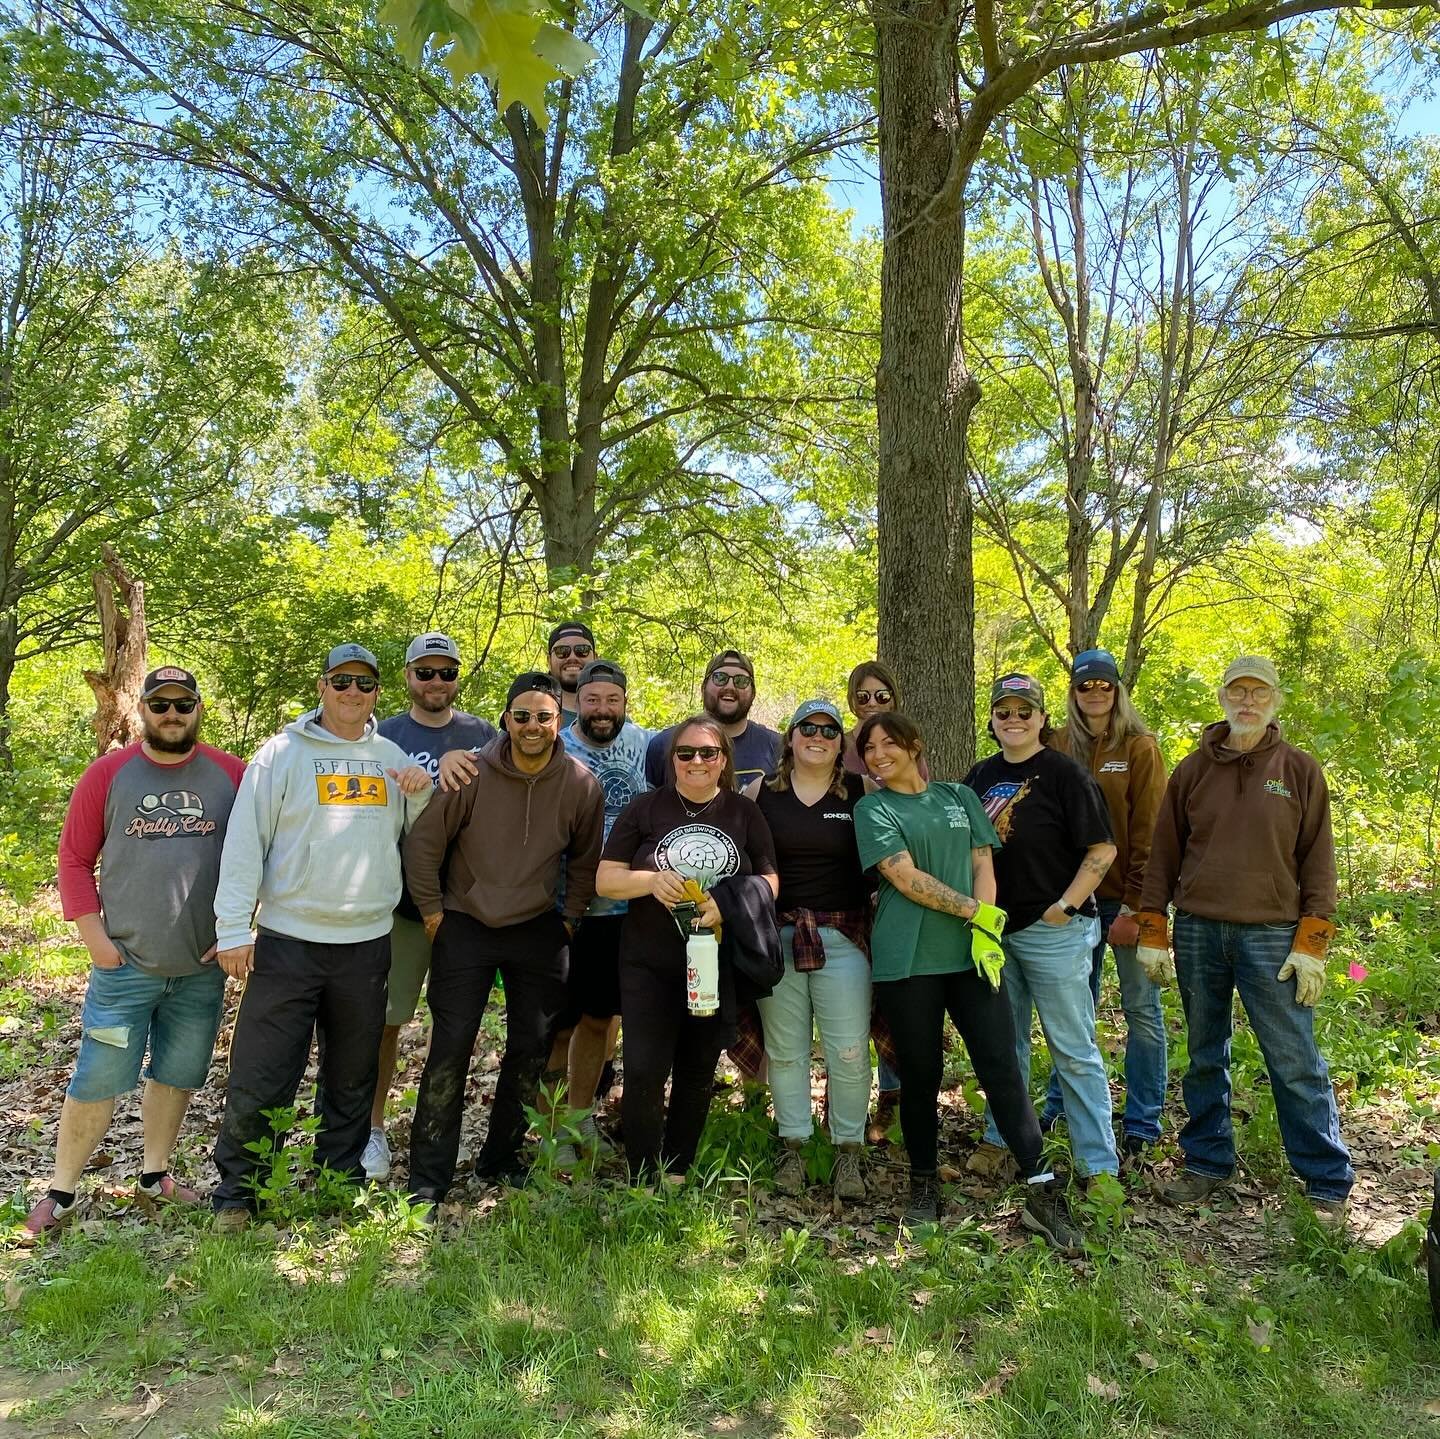 We had such a great time today helping clear out invasive Honeysuckle from Kingswood Park! 🌿 Huge thank you to our team that helped out today 💪 Now time to enjoy a crisp Sonder brew in the Beer Garden! 🍻

#SonderBrewing #UniquelyCrafted